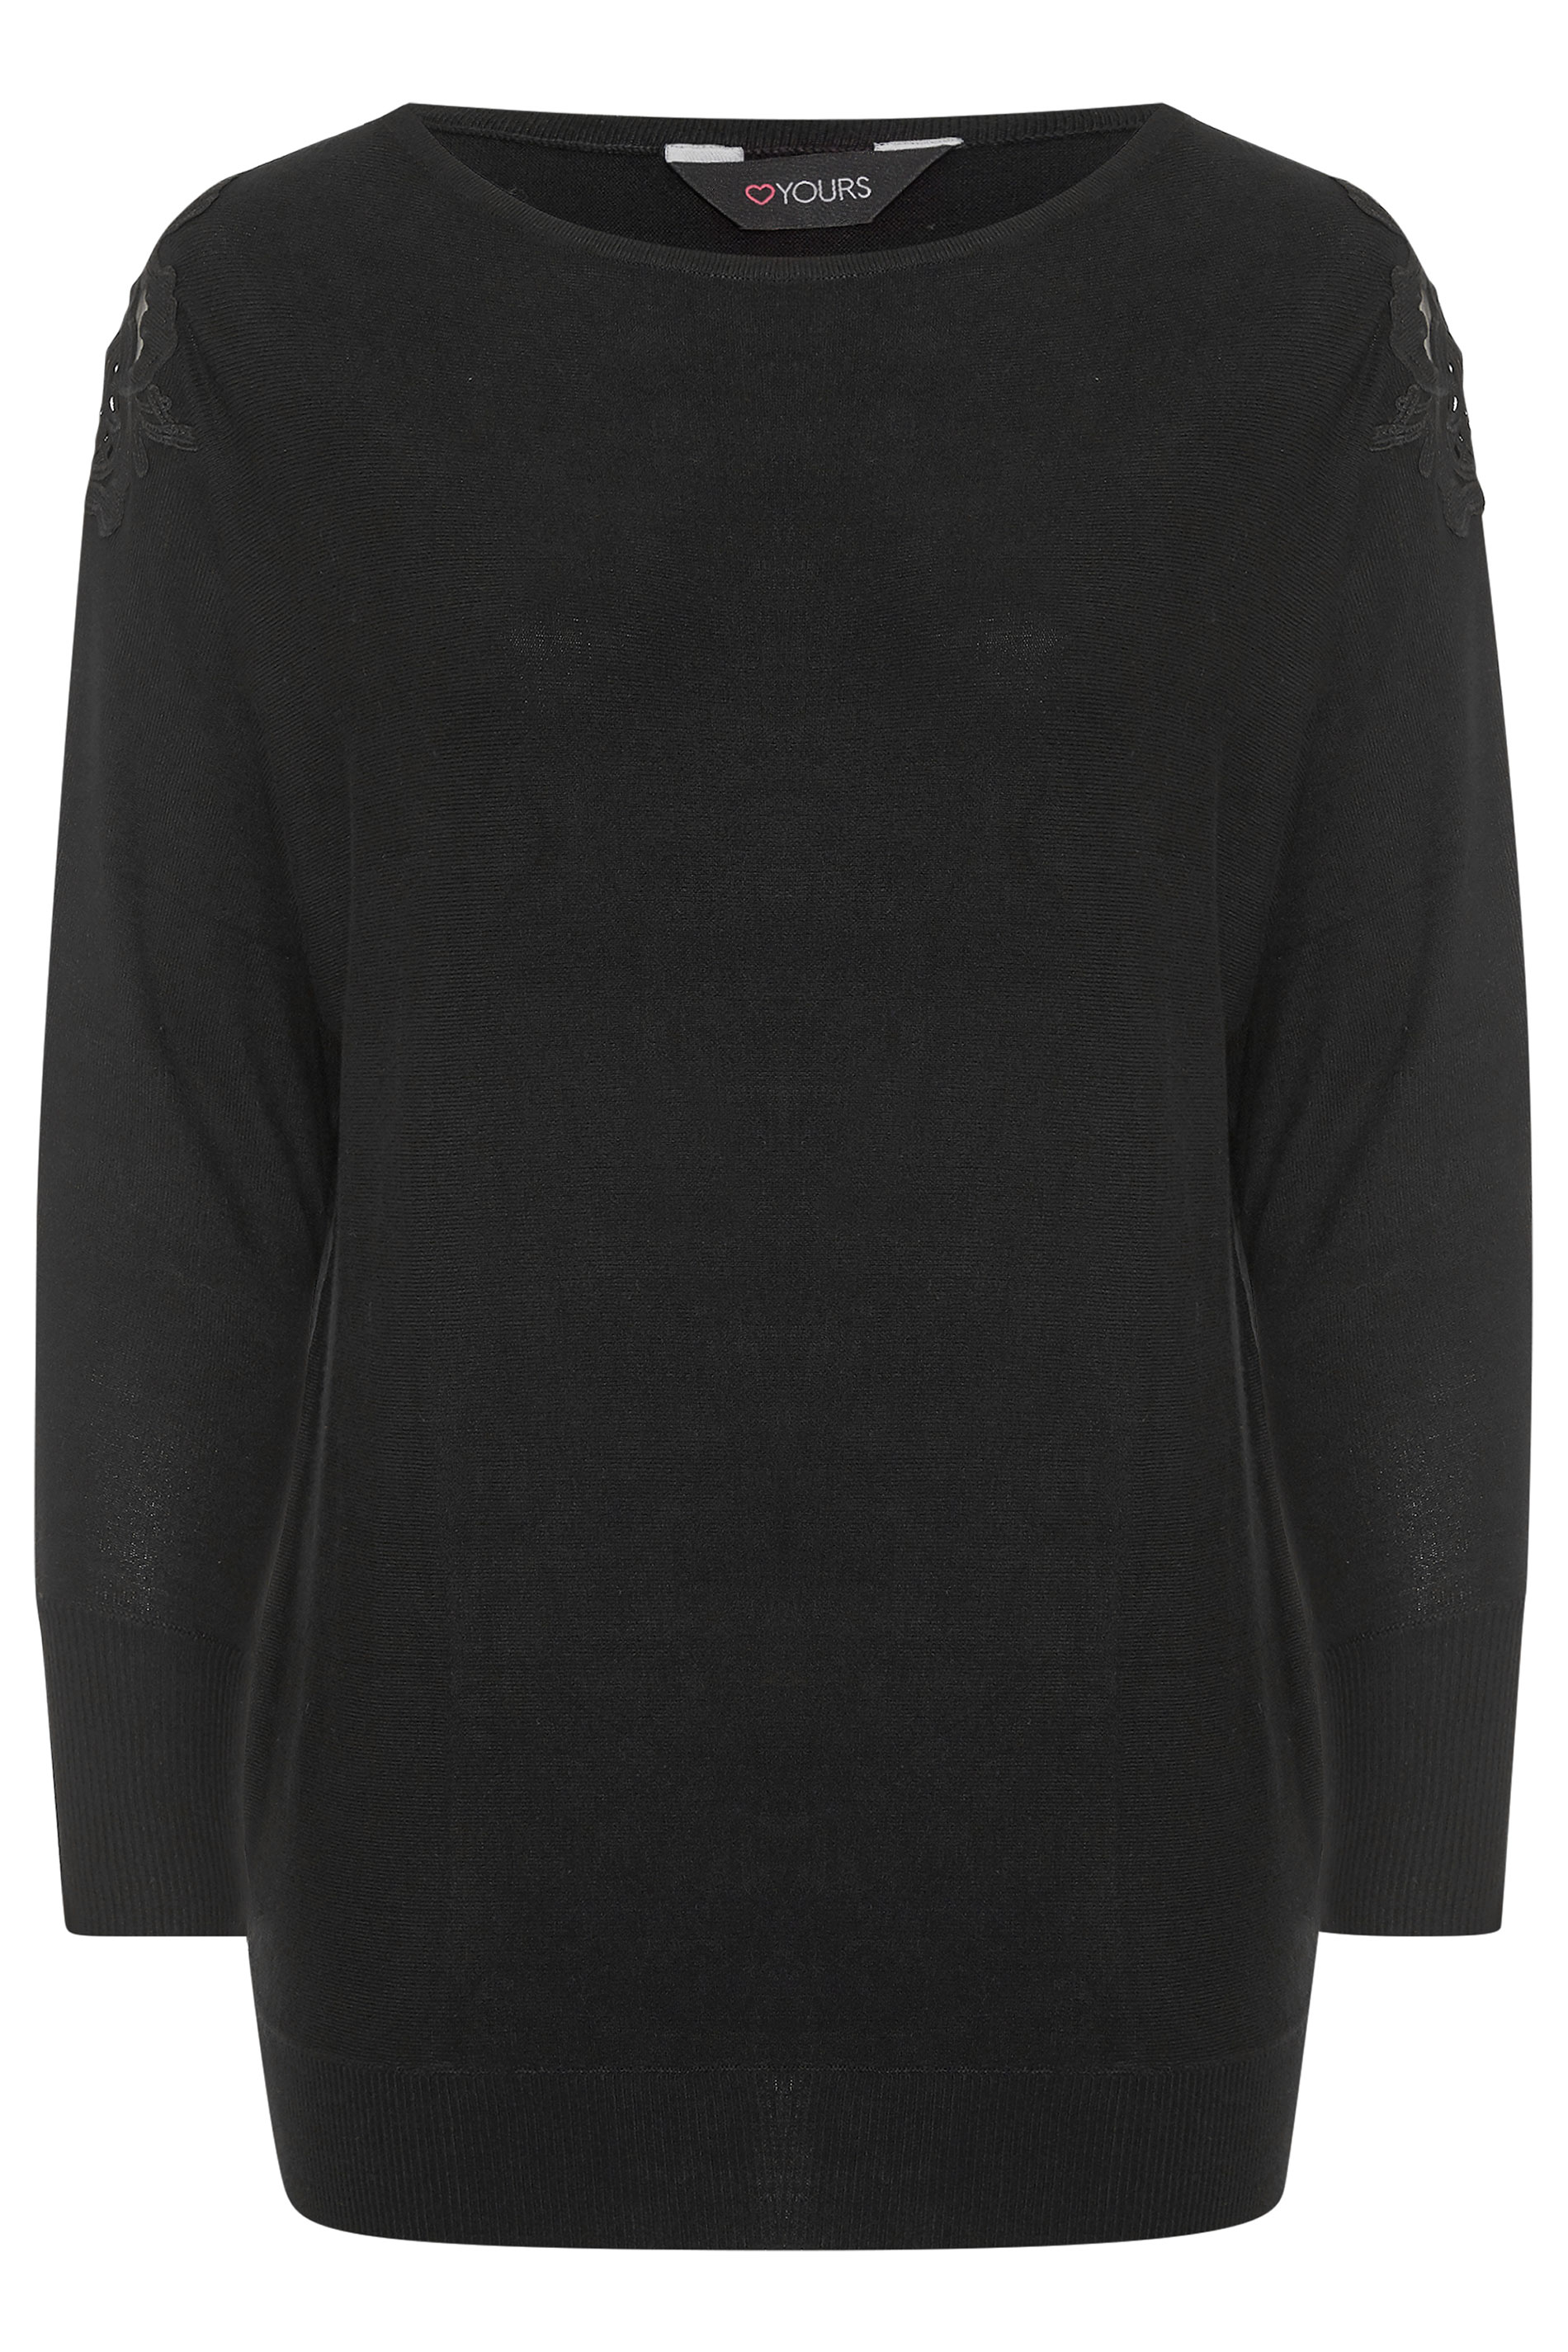 Black Lace Shoulder Knitted Jumper | Yours Clothing